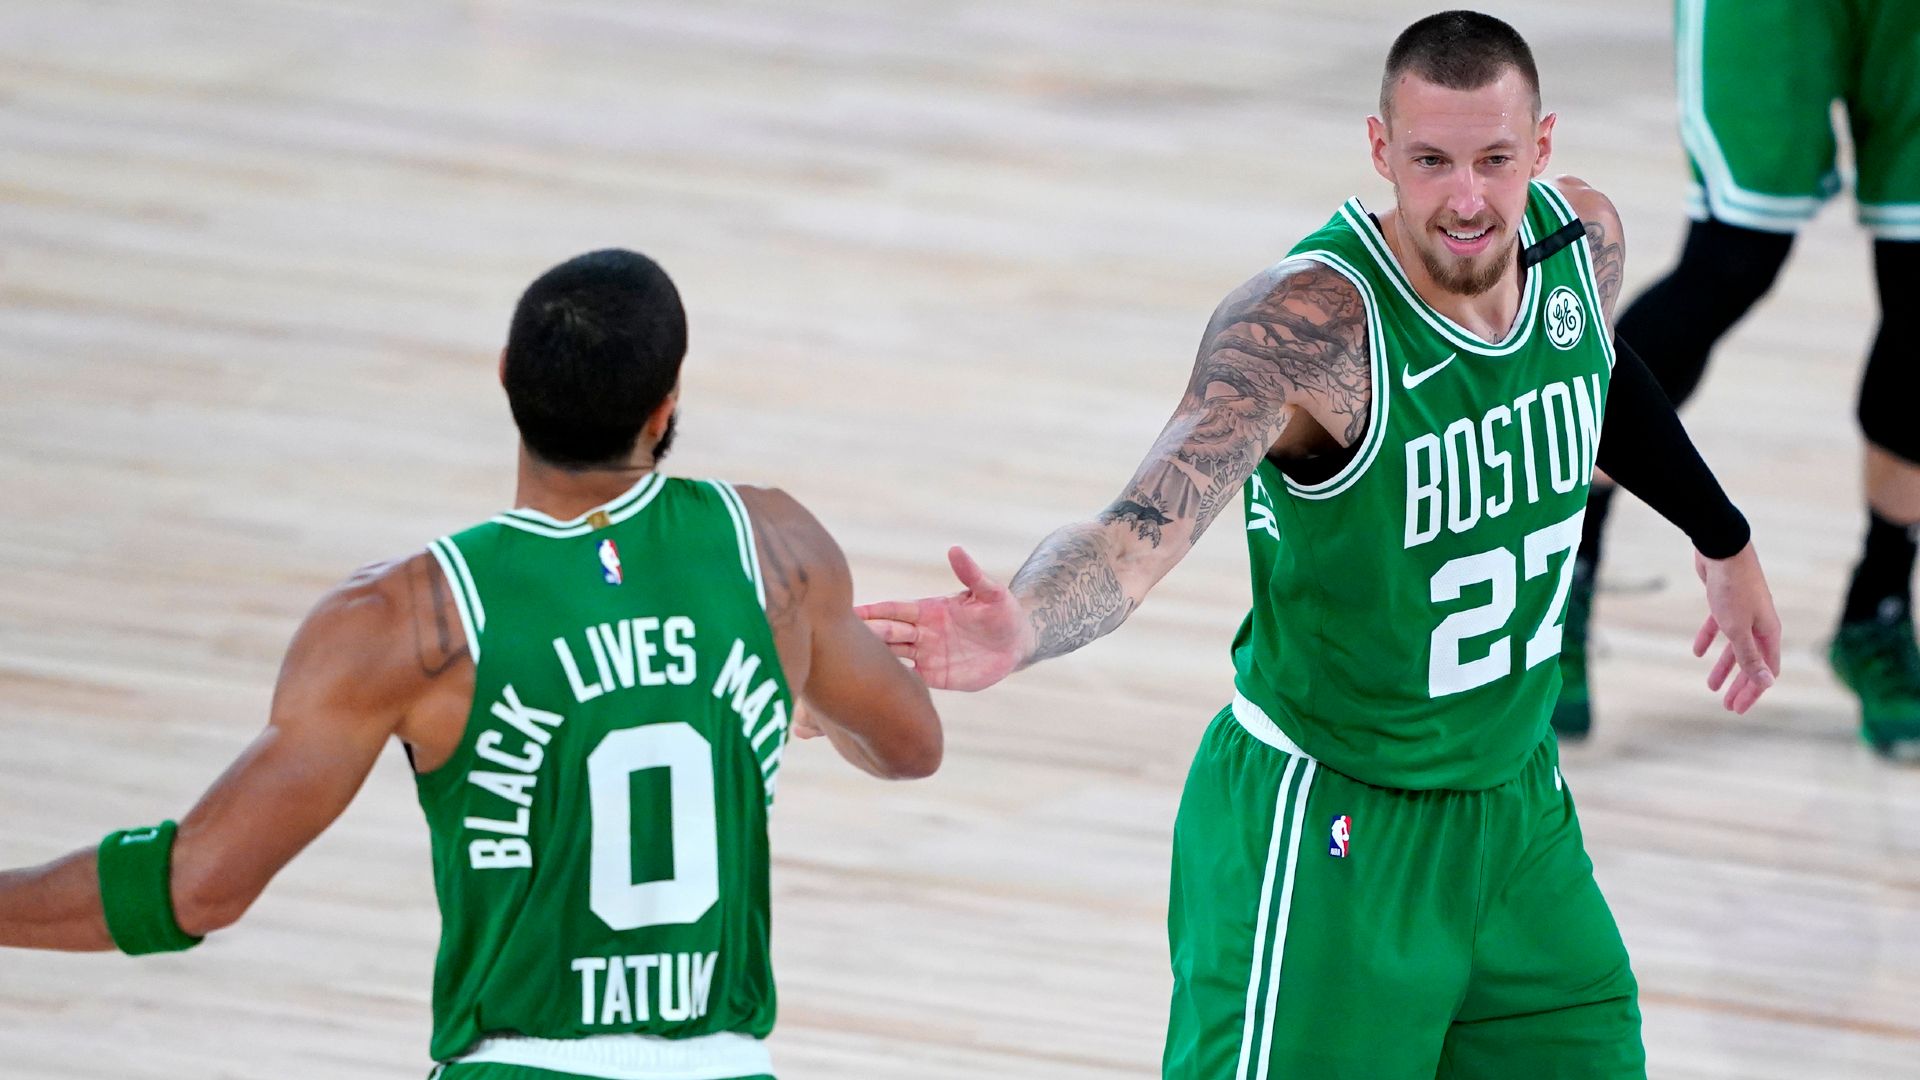 Another even team performance saw the Boston Celtics comprehensively beat the Toronto Raptors.